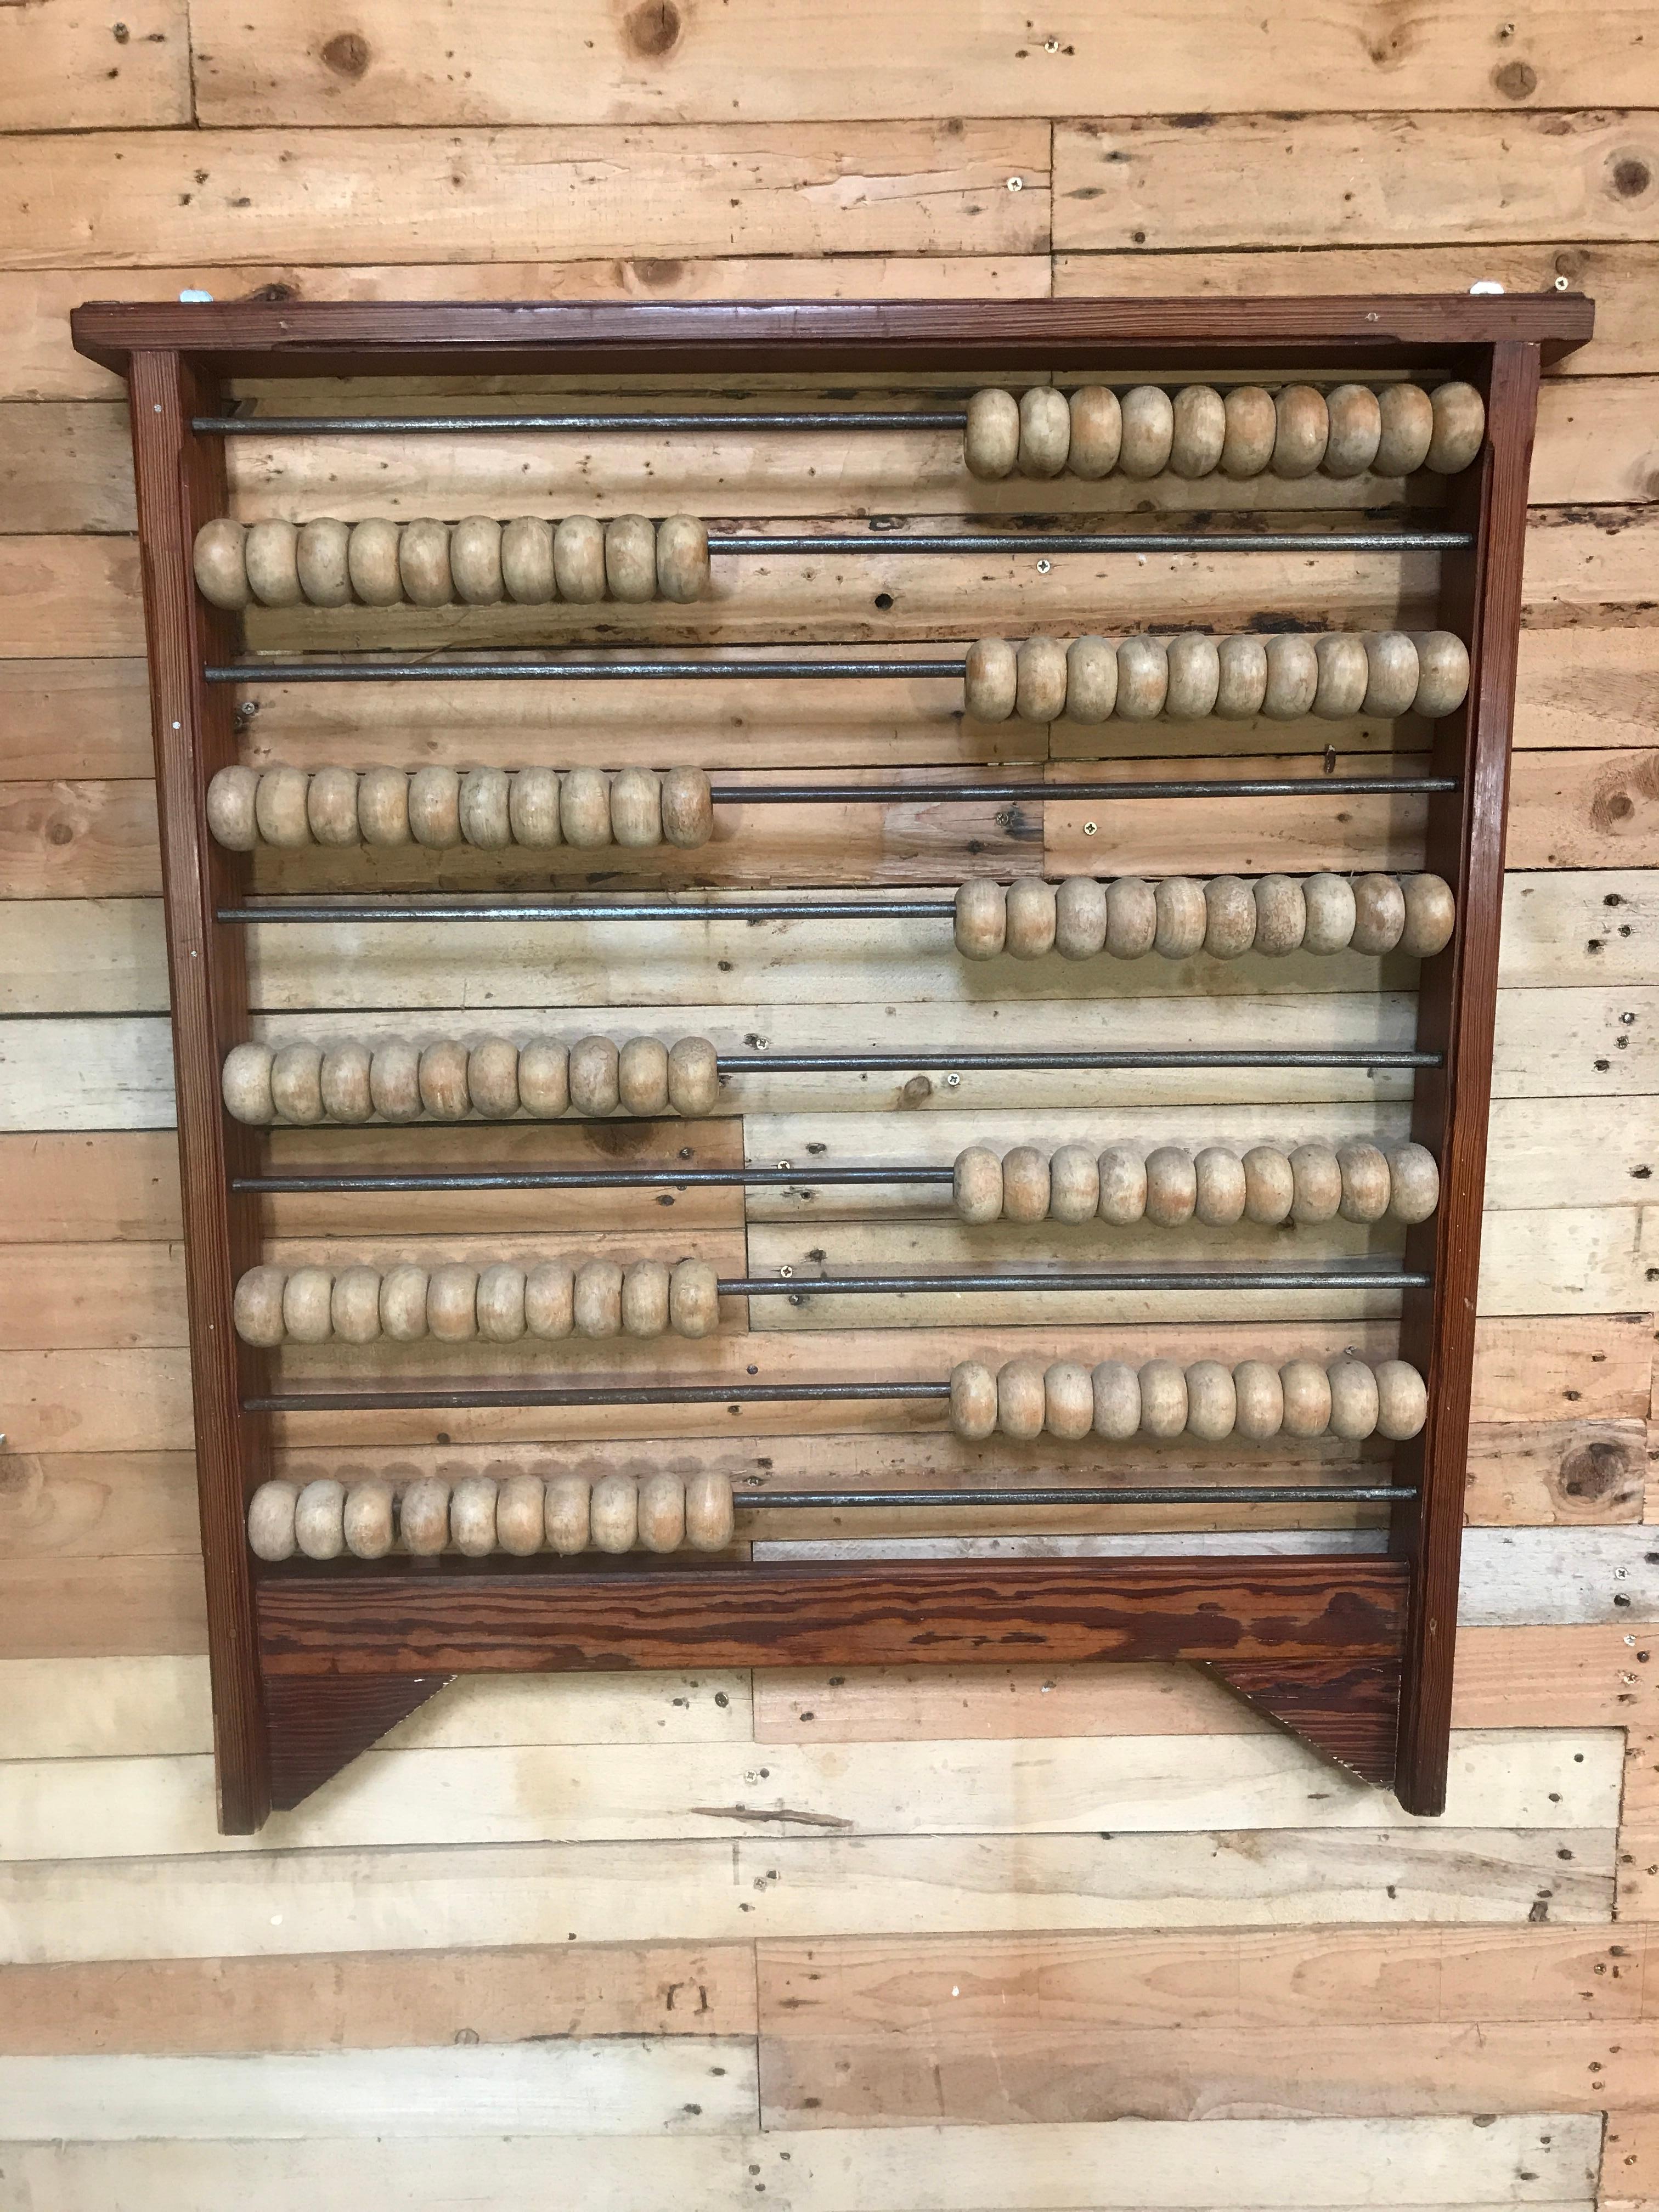 Large antique wall hanging French Abacus

Size: H 95cm, D 7cm, W 86cm.